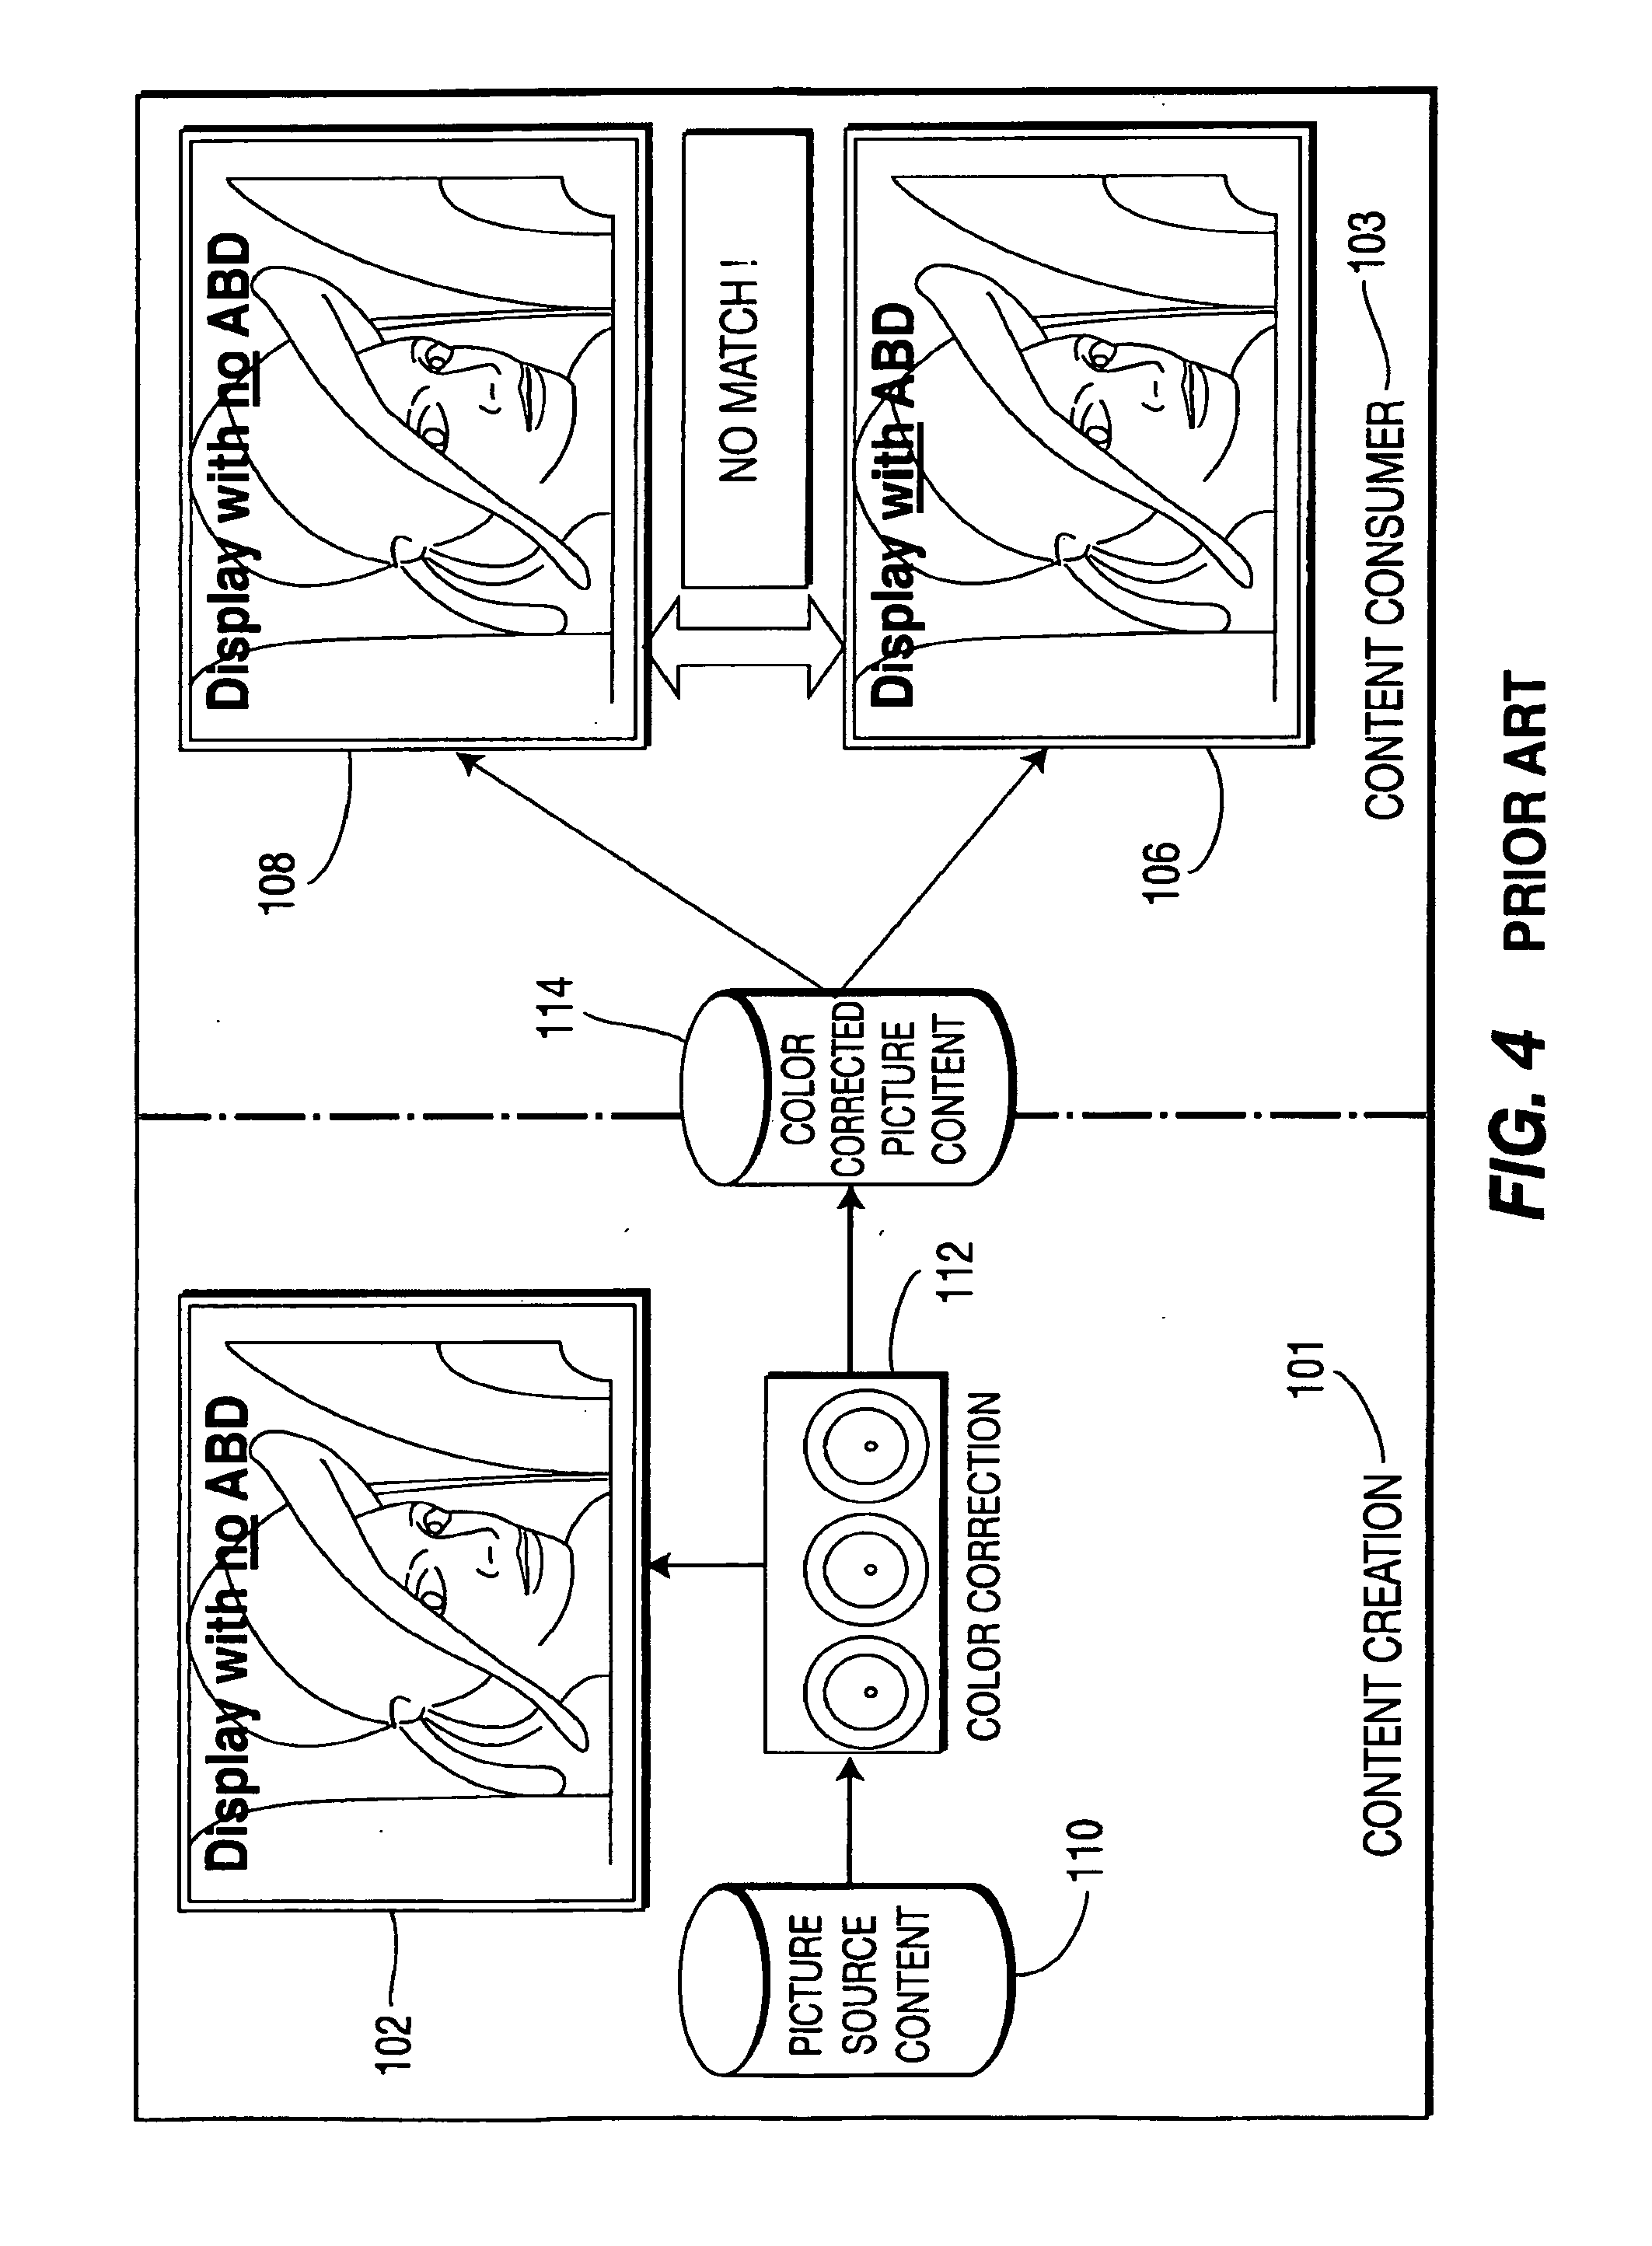 System and method for color correction between displays with and without average picture dependency